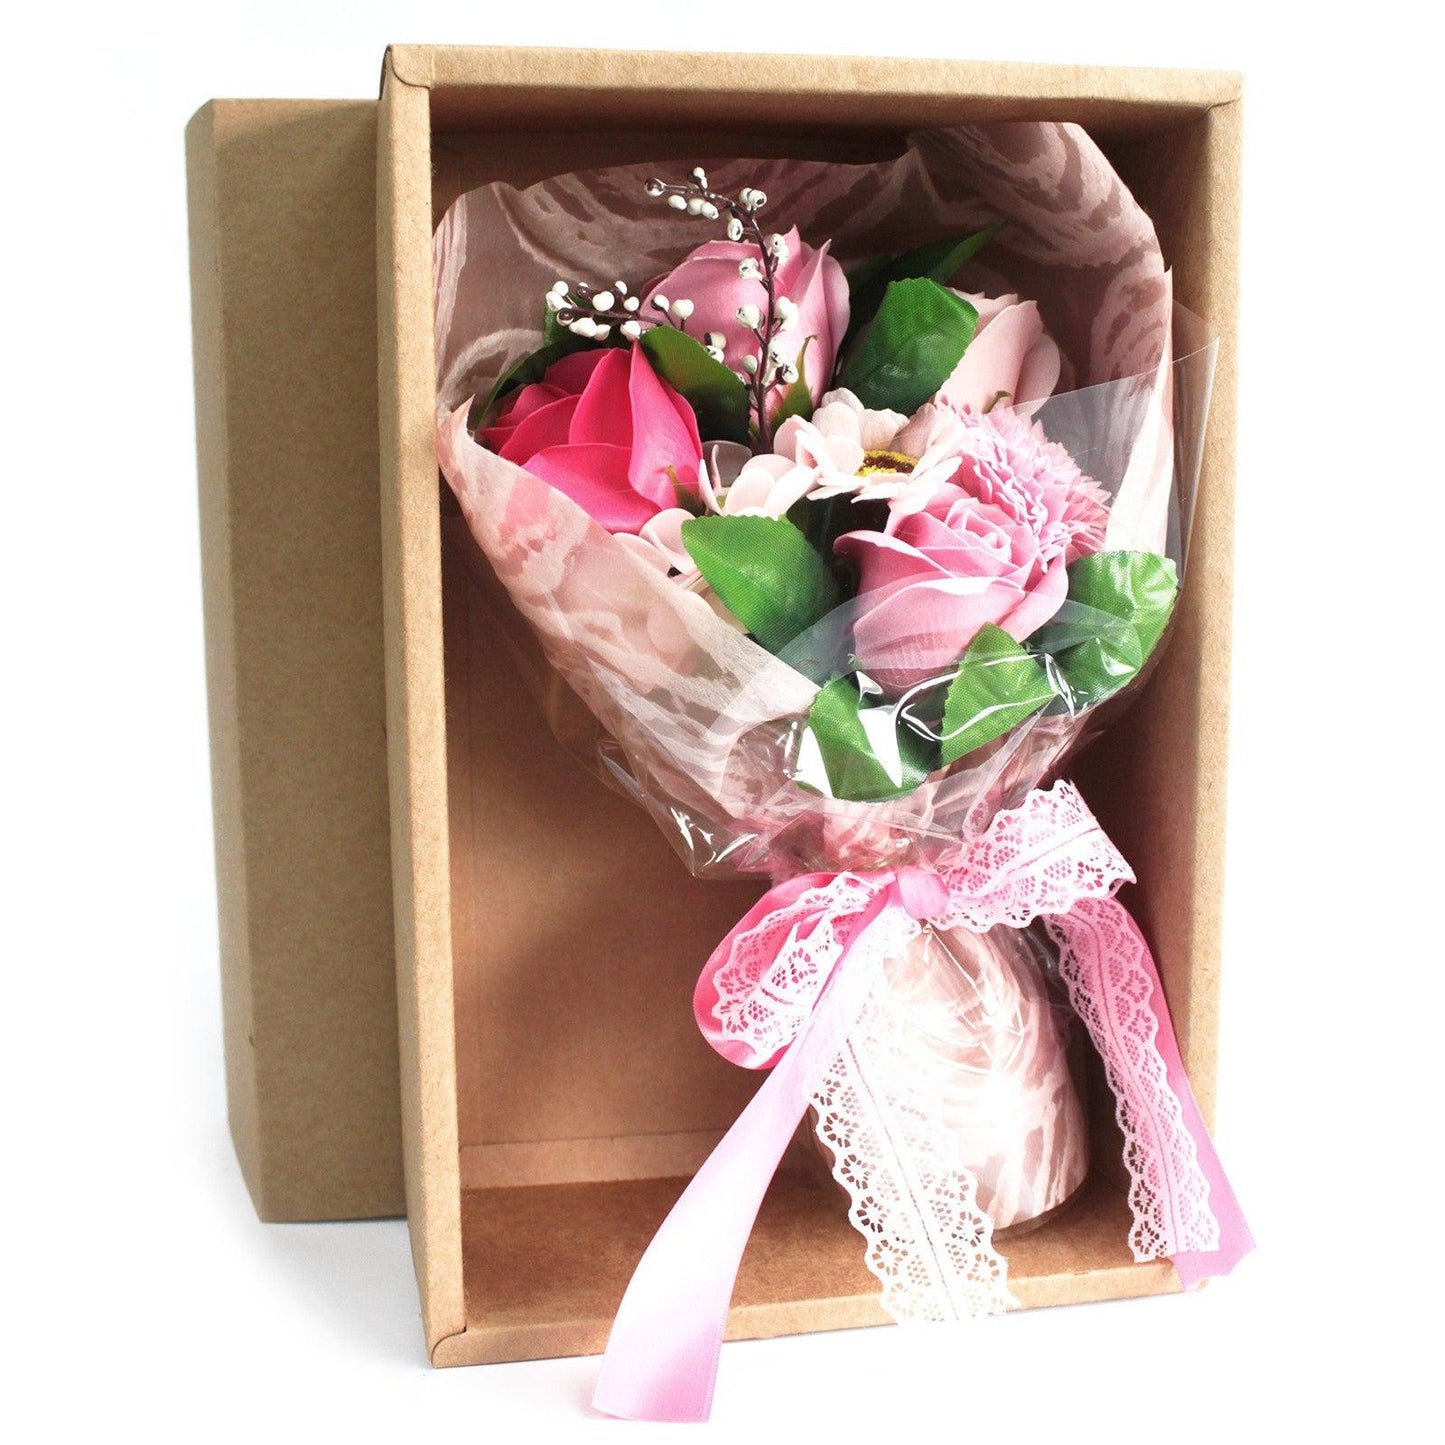 Boxed Hand Soap Flower Bouquet - Pink - DuvetDay.co.uk